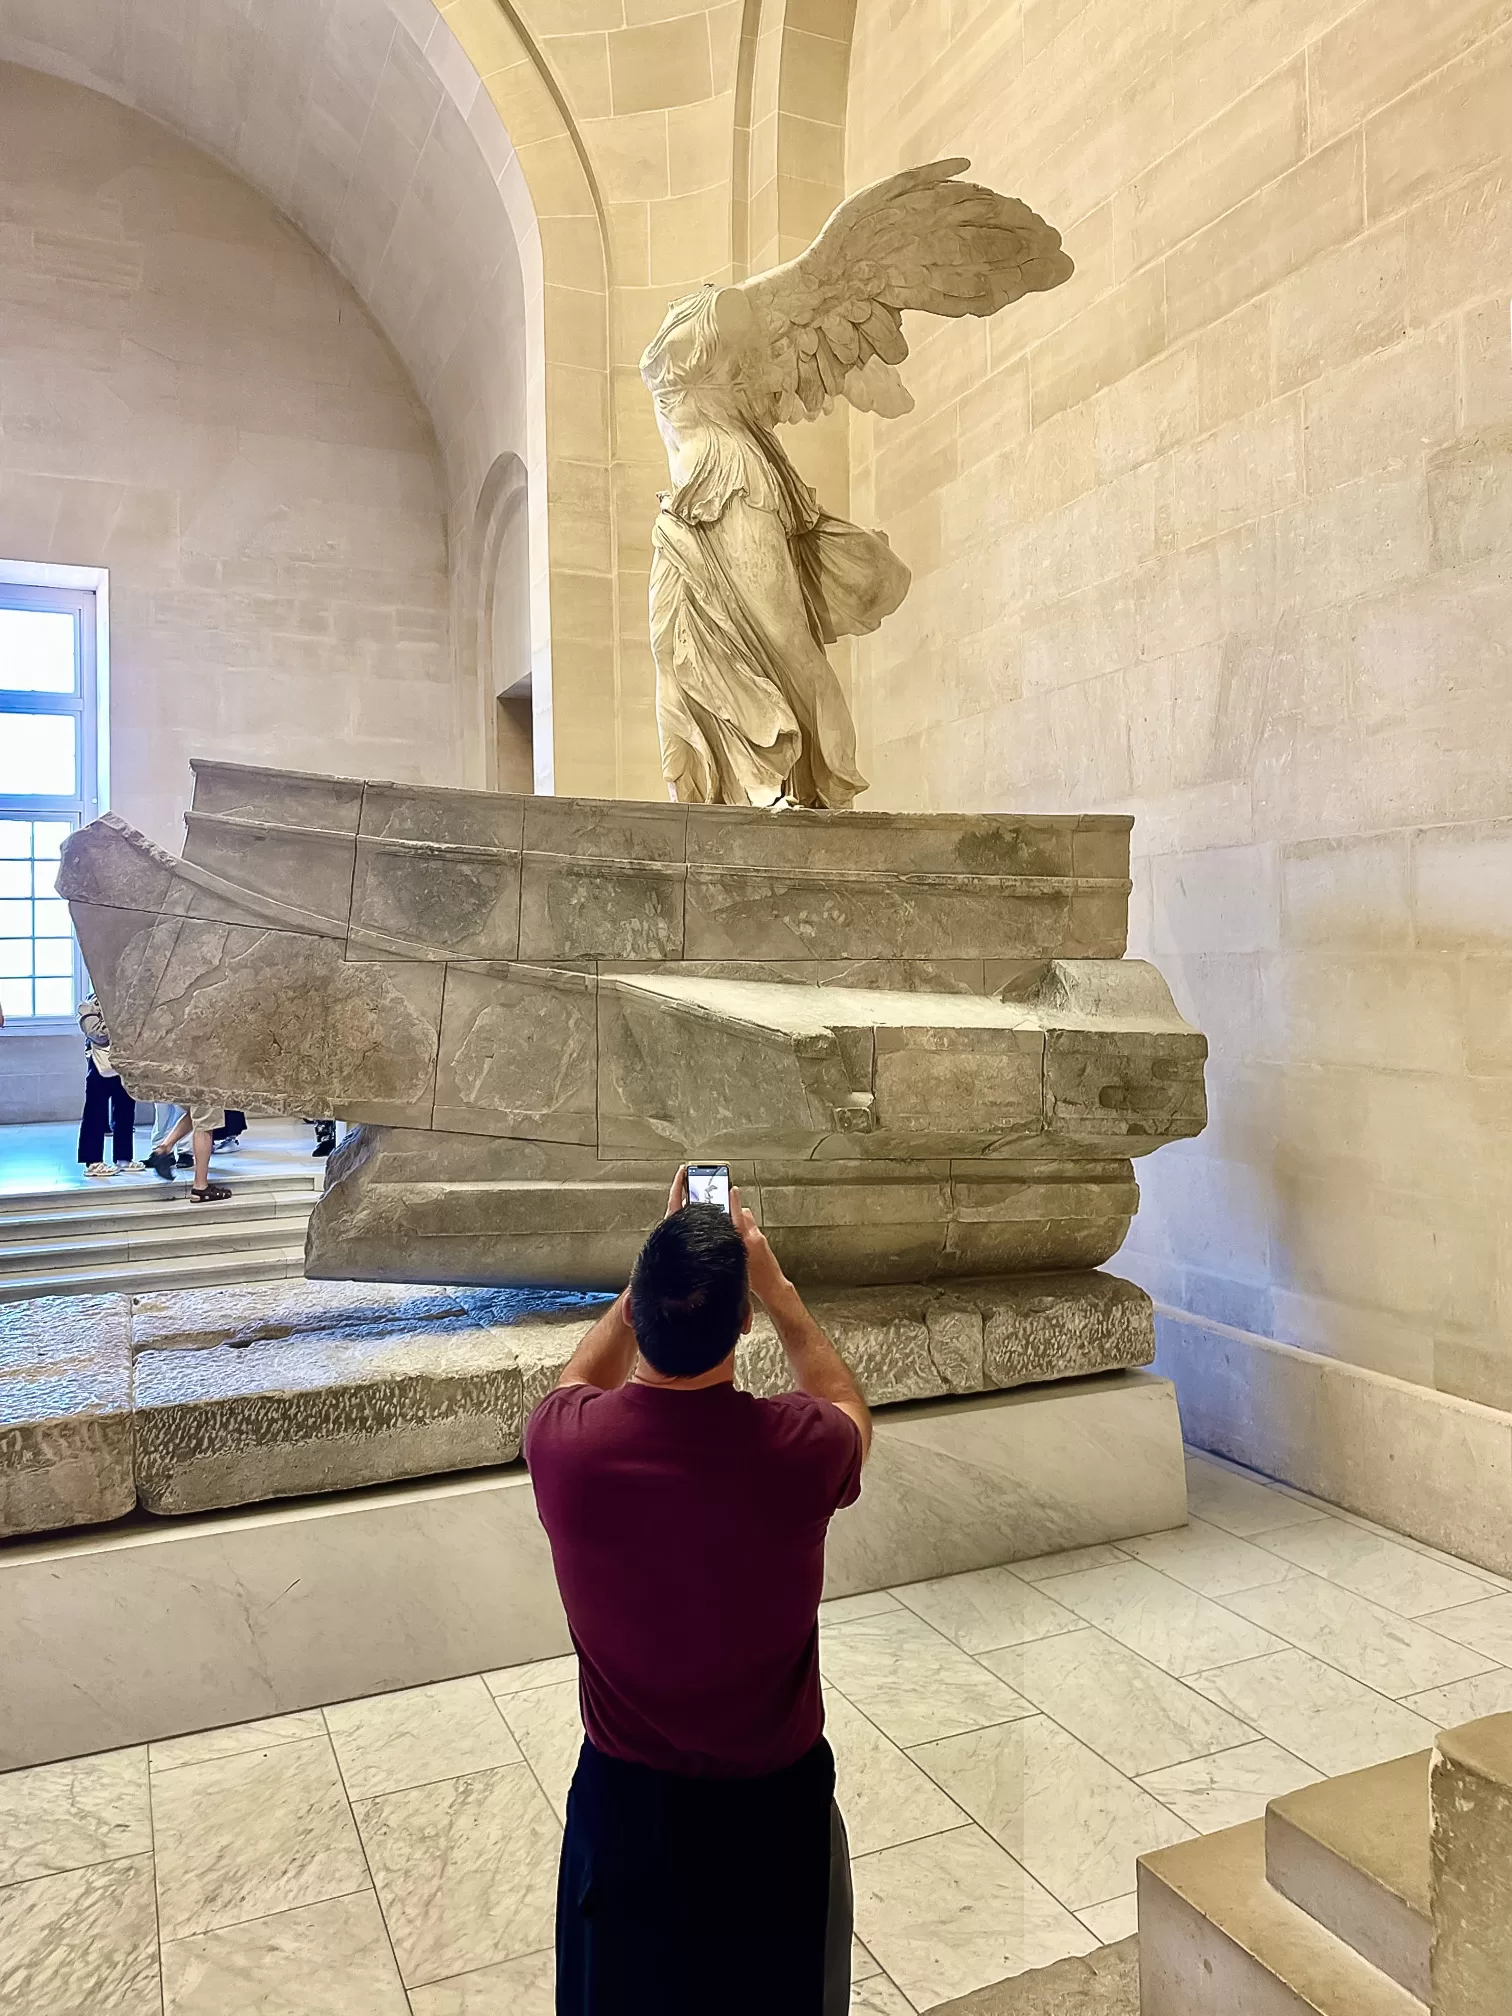 What to see at the Louvre